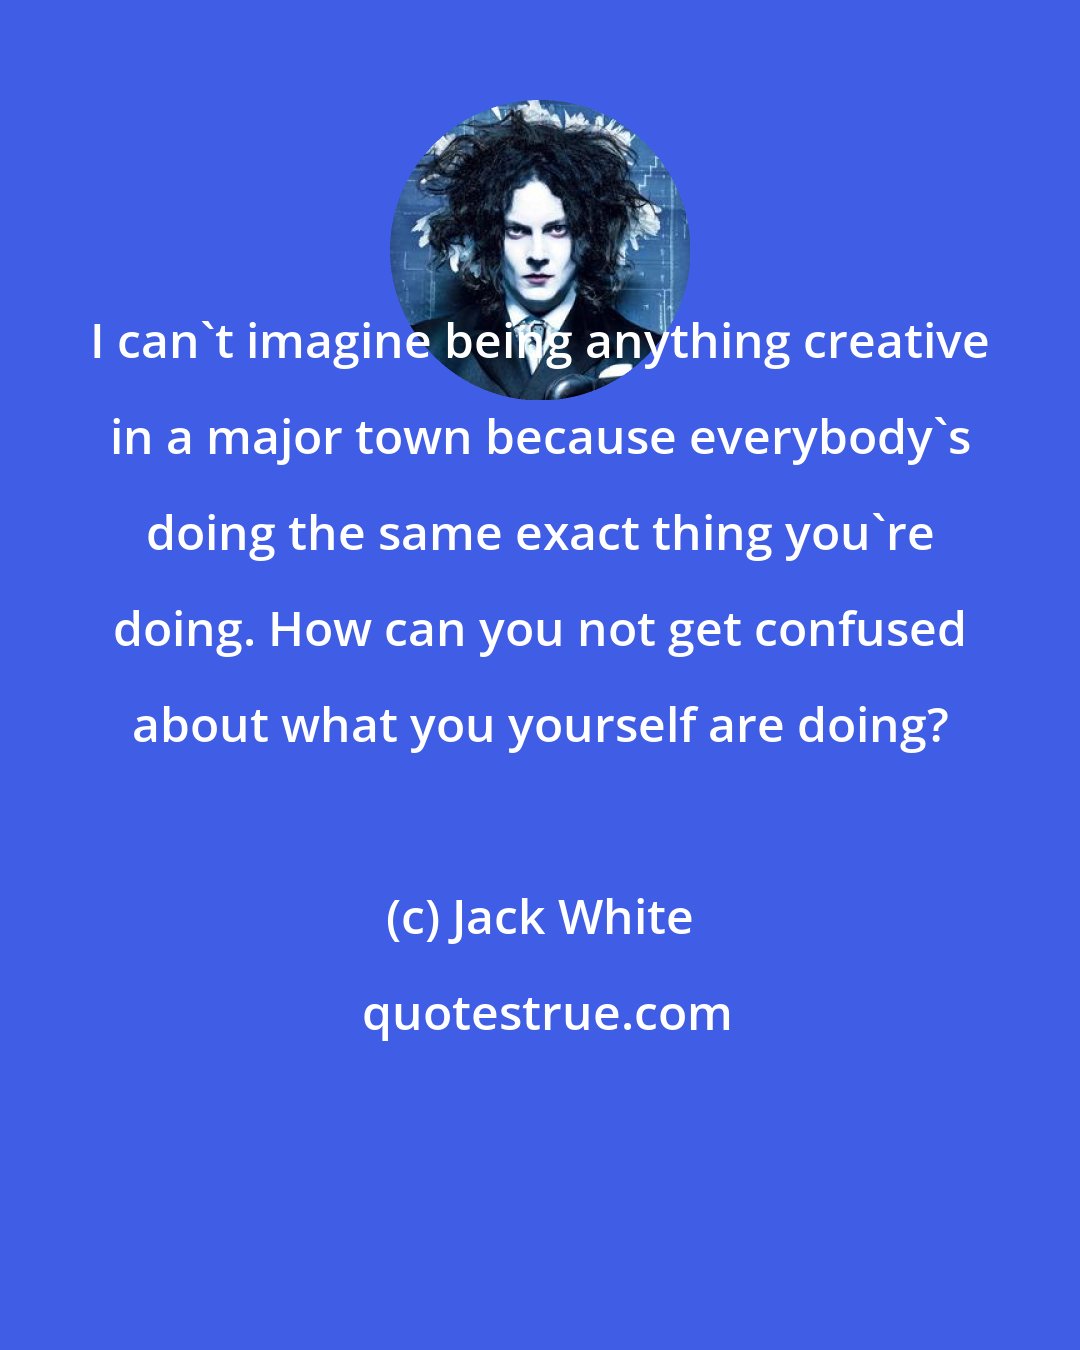 Jack White: I can't imagine being anything creative in a major town because everybody's doing the same exact thing you're doing. How can you not get confused about what you yourself are doing?